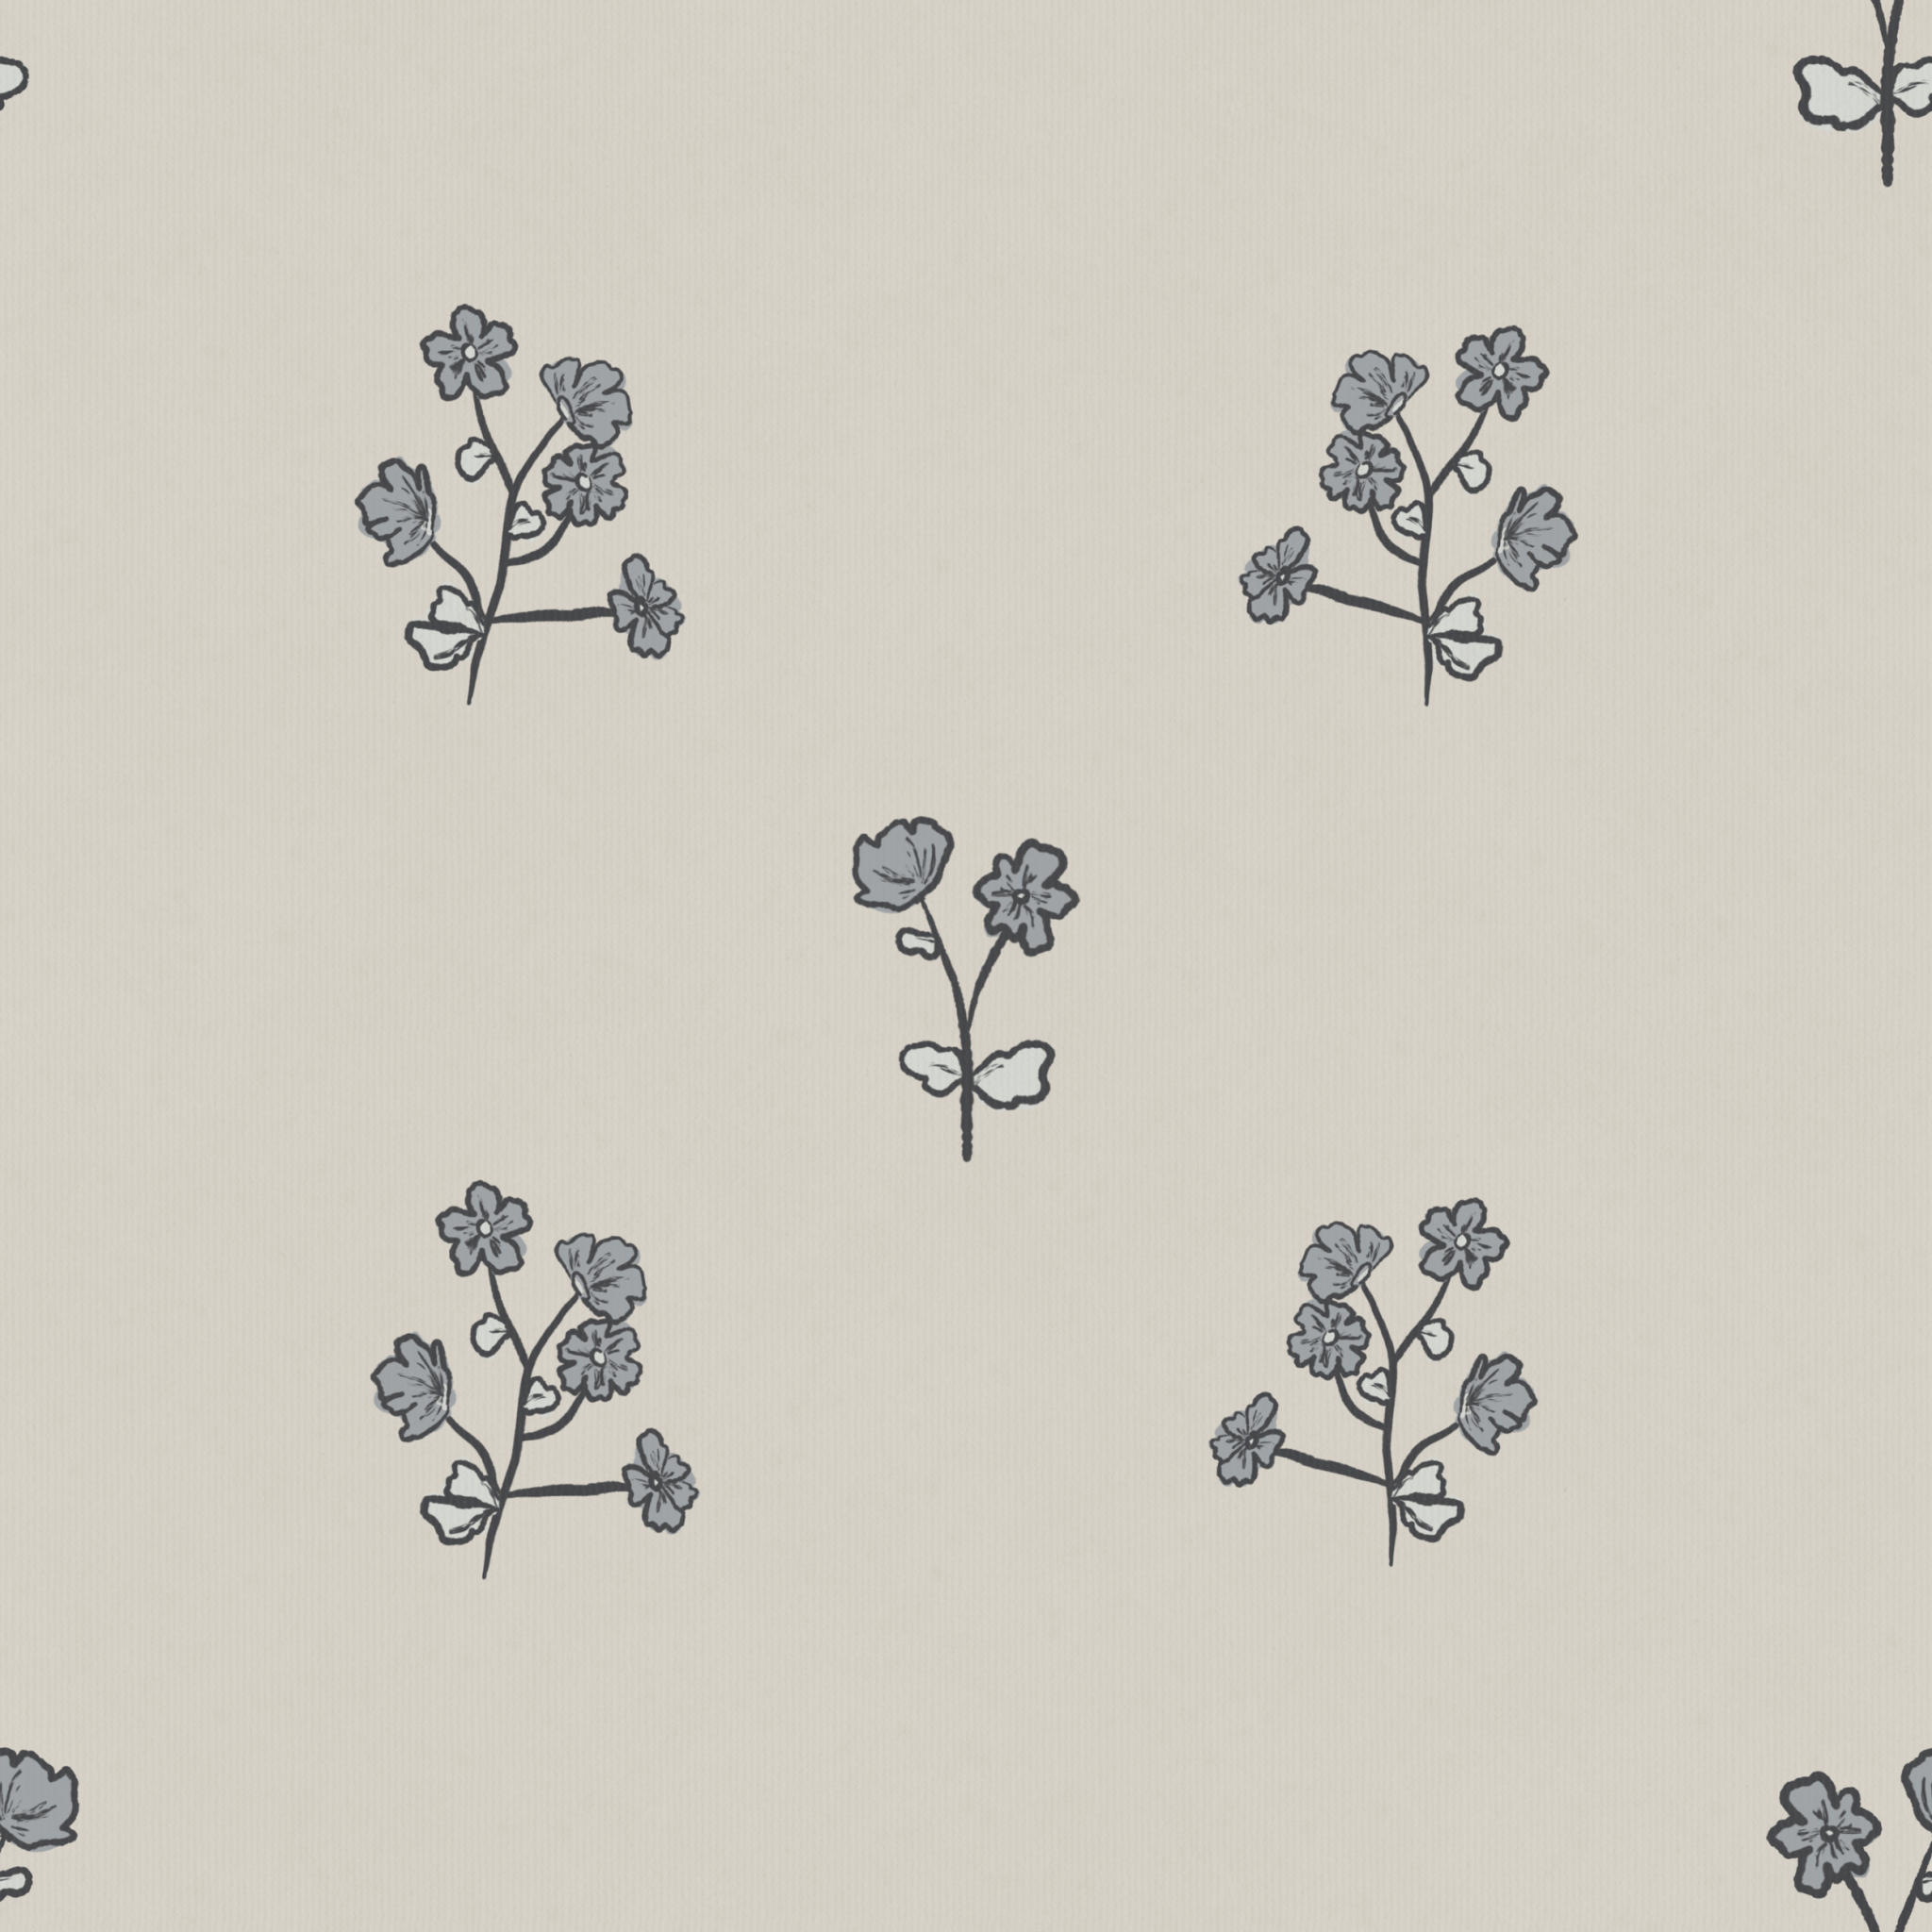 A close-up of a wallpaper with a simple and elegant design of bluebell flowers in a soft blue tone, set against a clean, off-white background.